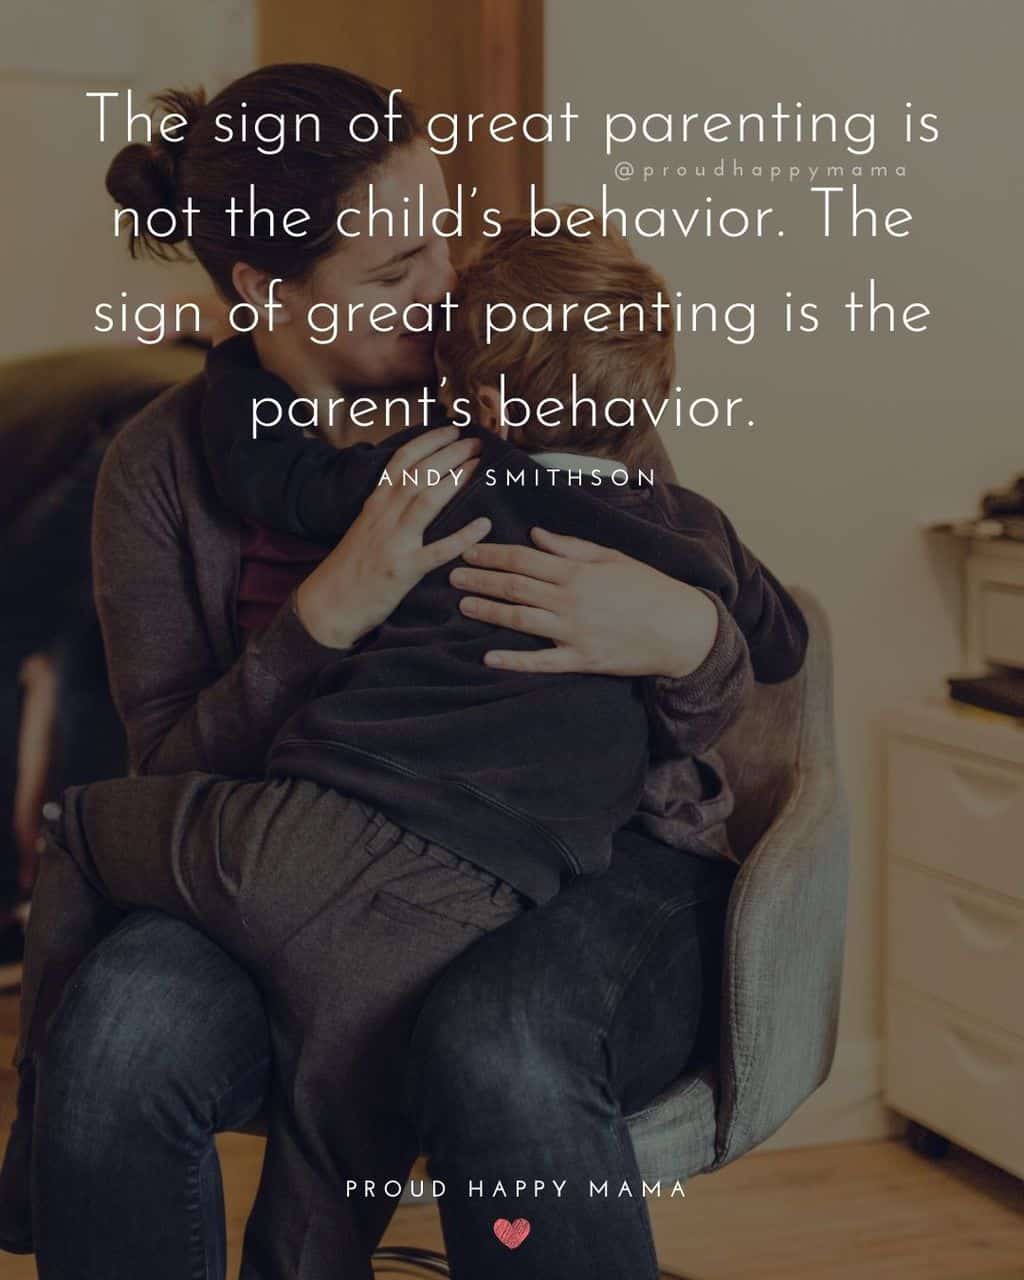 Parenting Quotes - The sign of great parenting is not the child’s behavior. The sign of great parenting is the parent’s behavior.’ – Andy Smithson